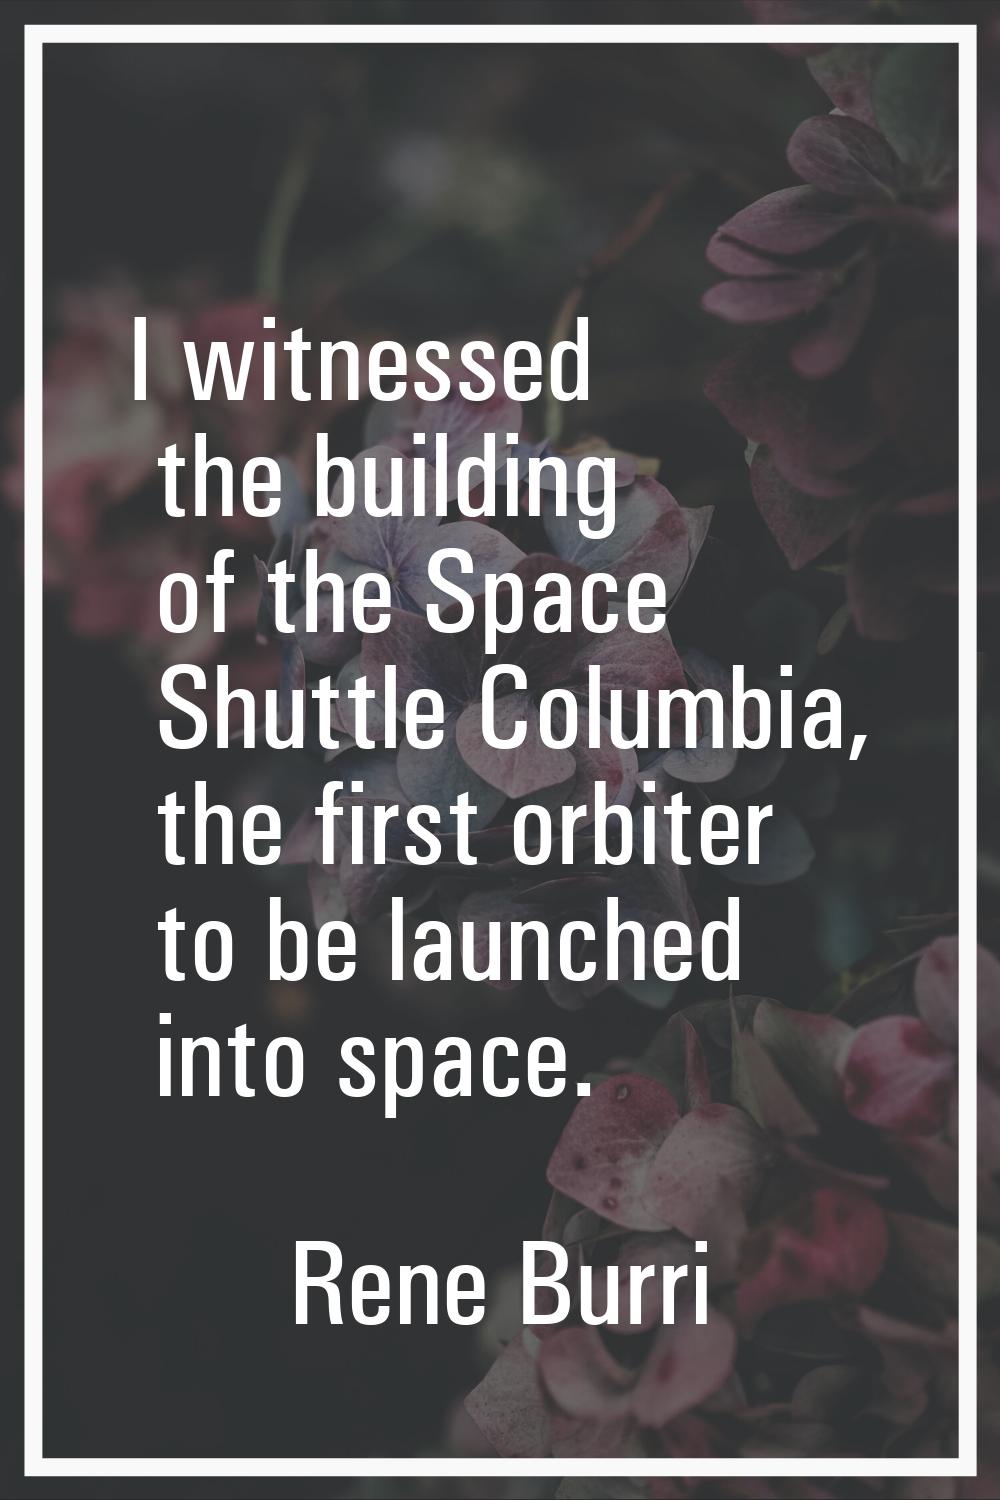 I witnessed the building of the Space Shuttle Columbia, the first orbiter to be launched into space